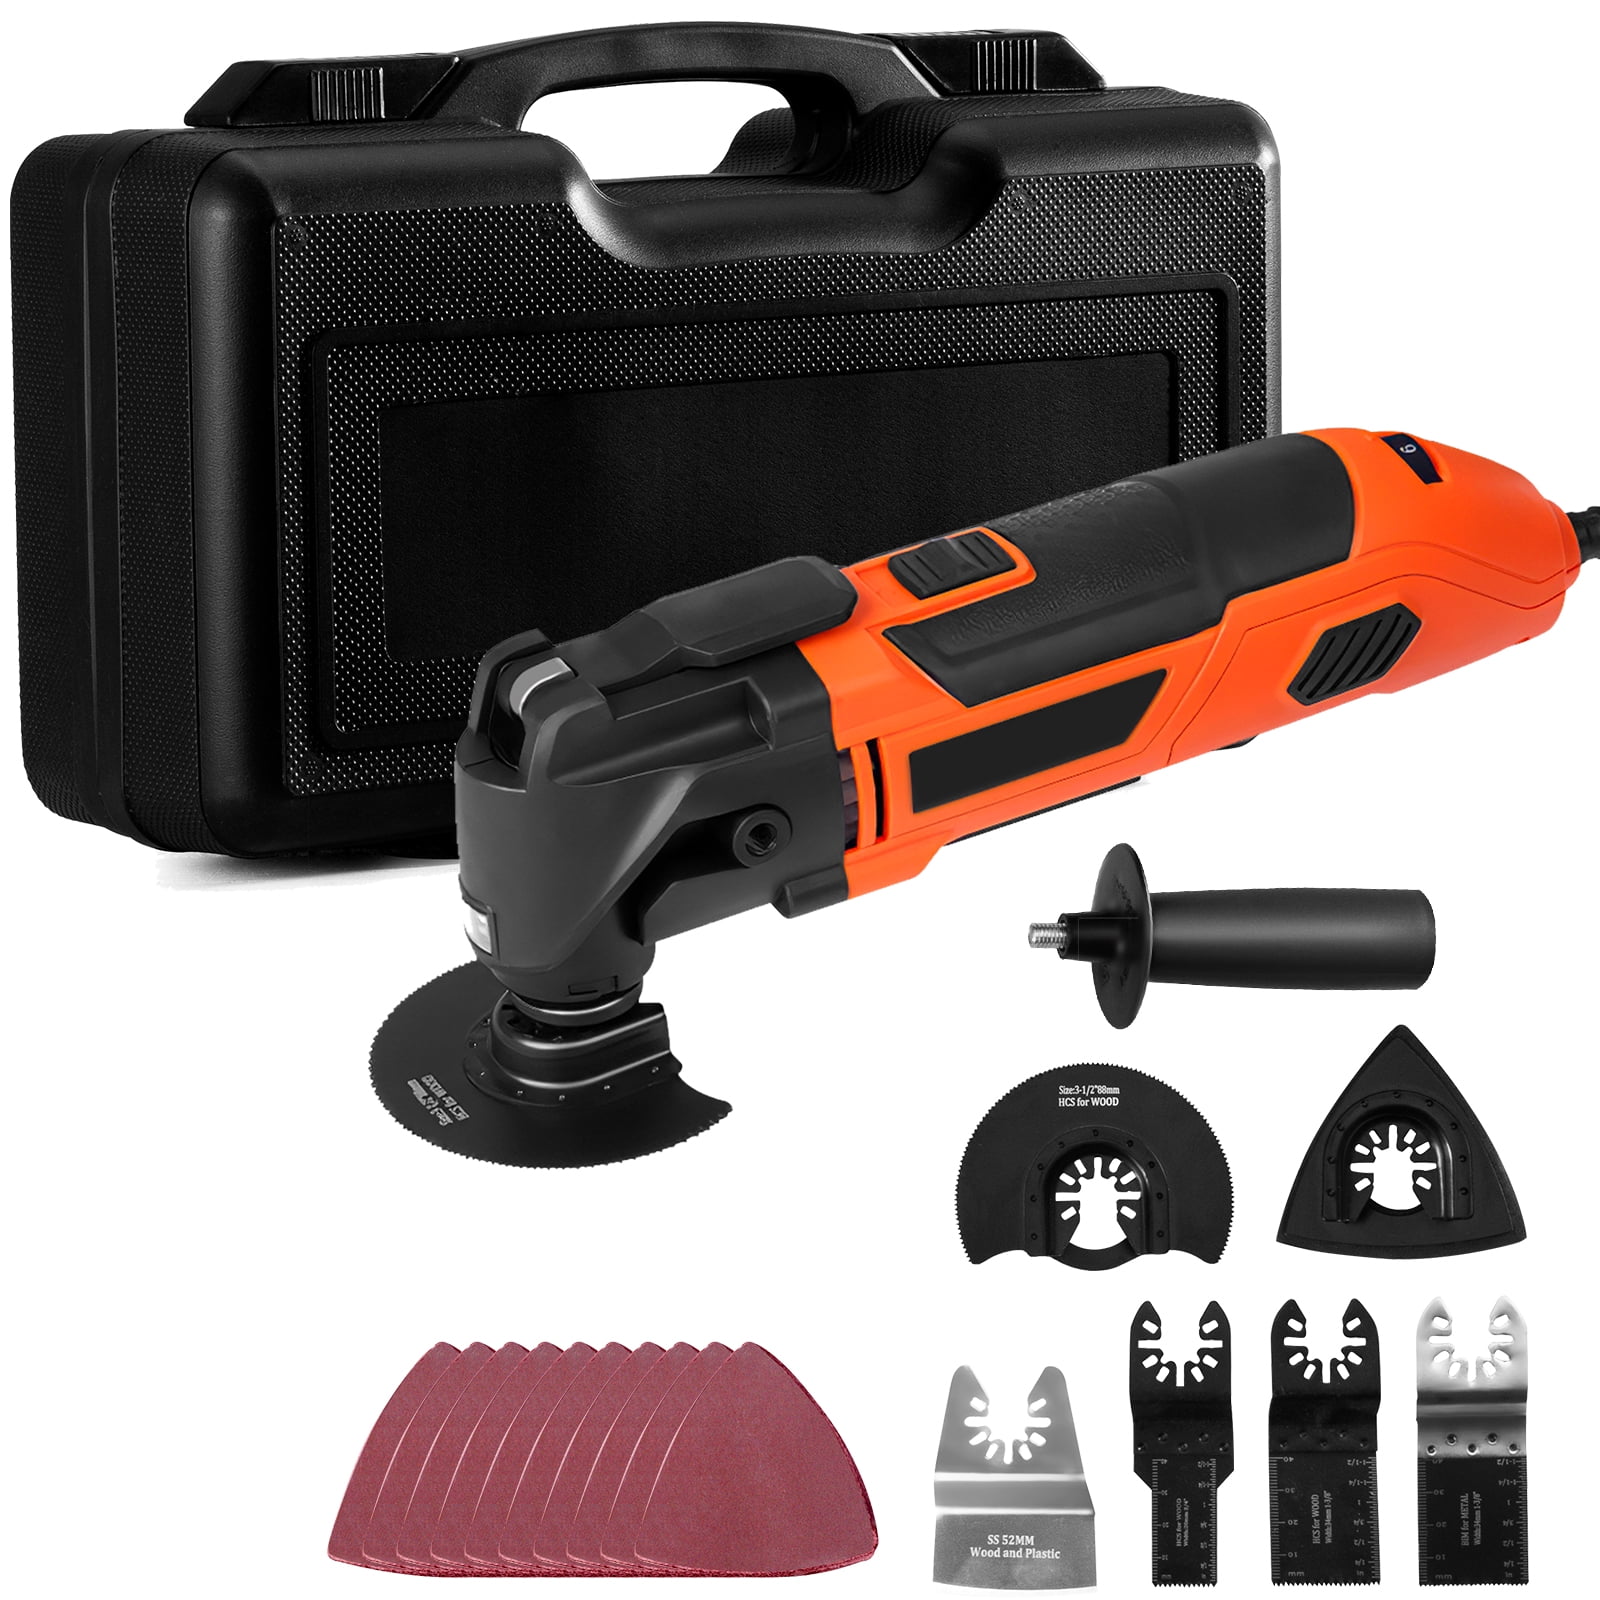 Vevorbrand Oscillating Multi Tool 11000-22000 OPM 6 Variable Speeds 3.1 Oscillating Angle, Size: 11000 RPM to 22000 RPM